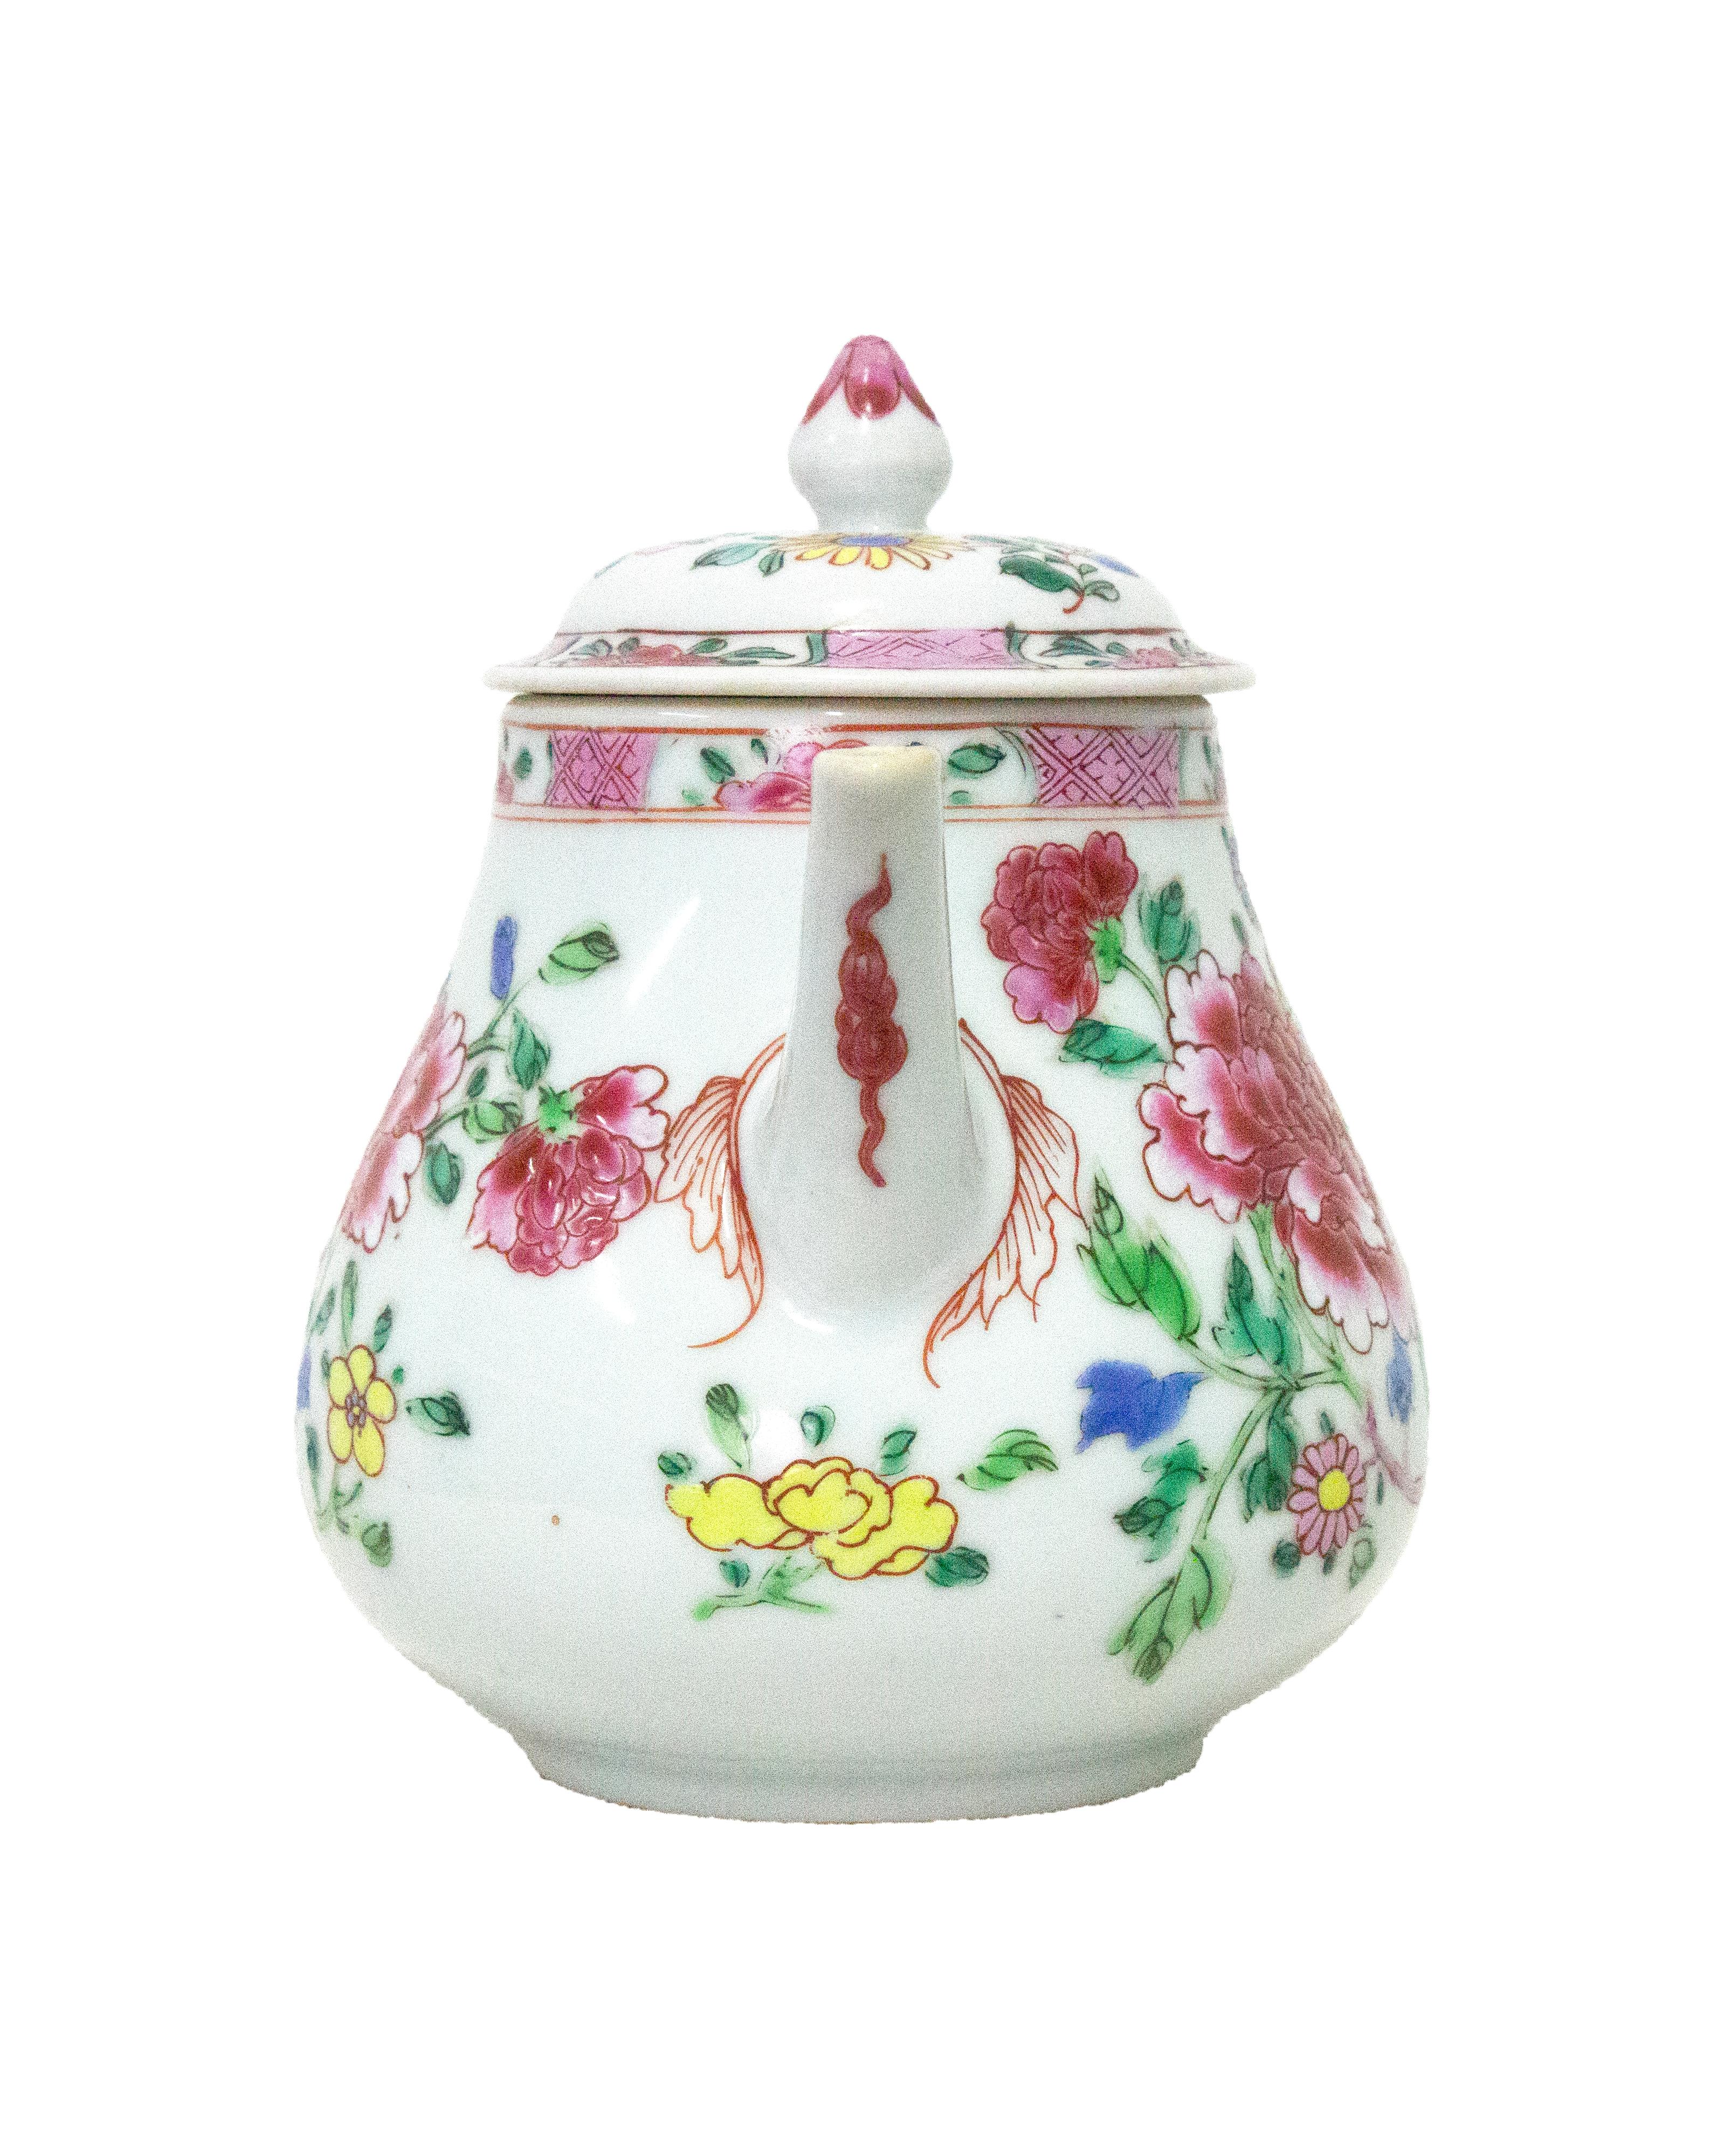 Chinese Porcelain teapot, East India Company, Qing dynasty (1622-1912), Yongzheng period (1723-1735). Decorated in Famille rose shades on the glaze. The body of the teapot features several peonies, symbol of spring, love, affection and feminine